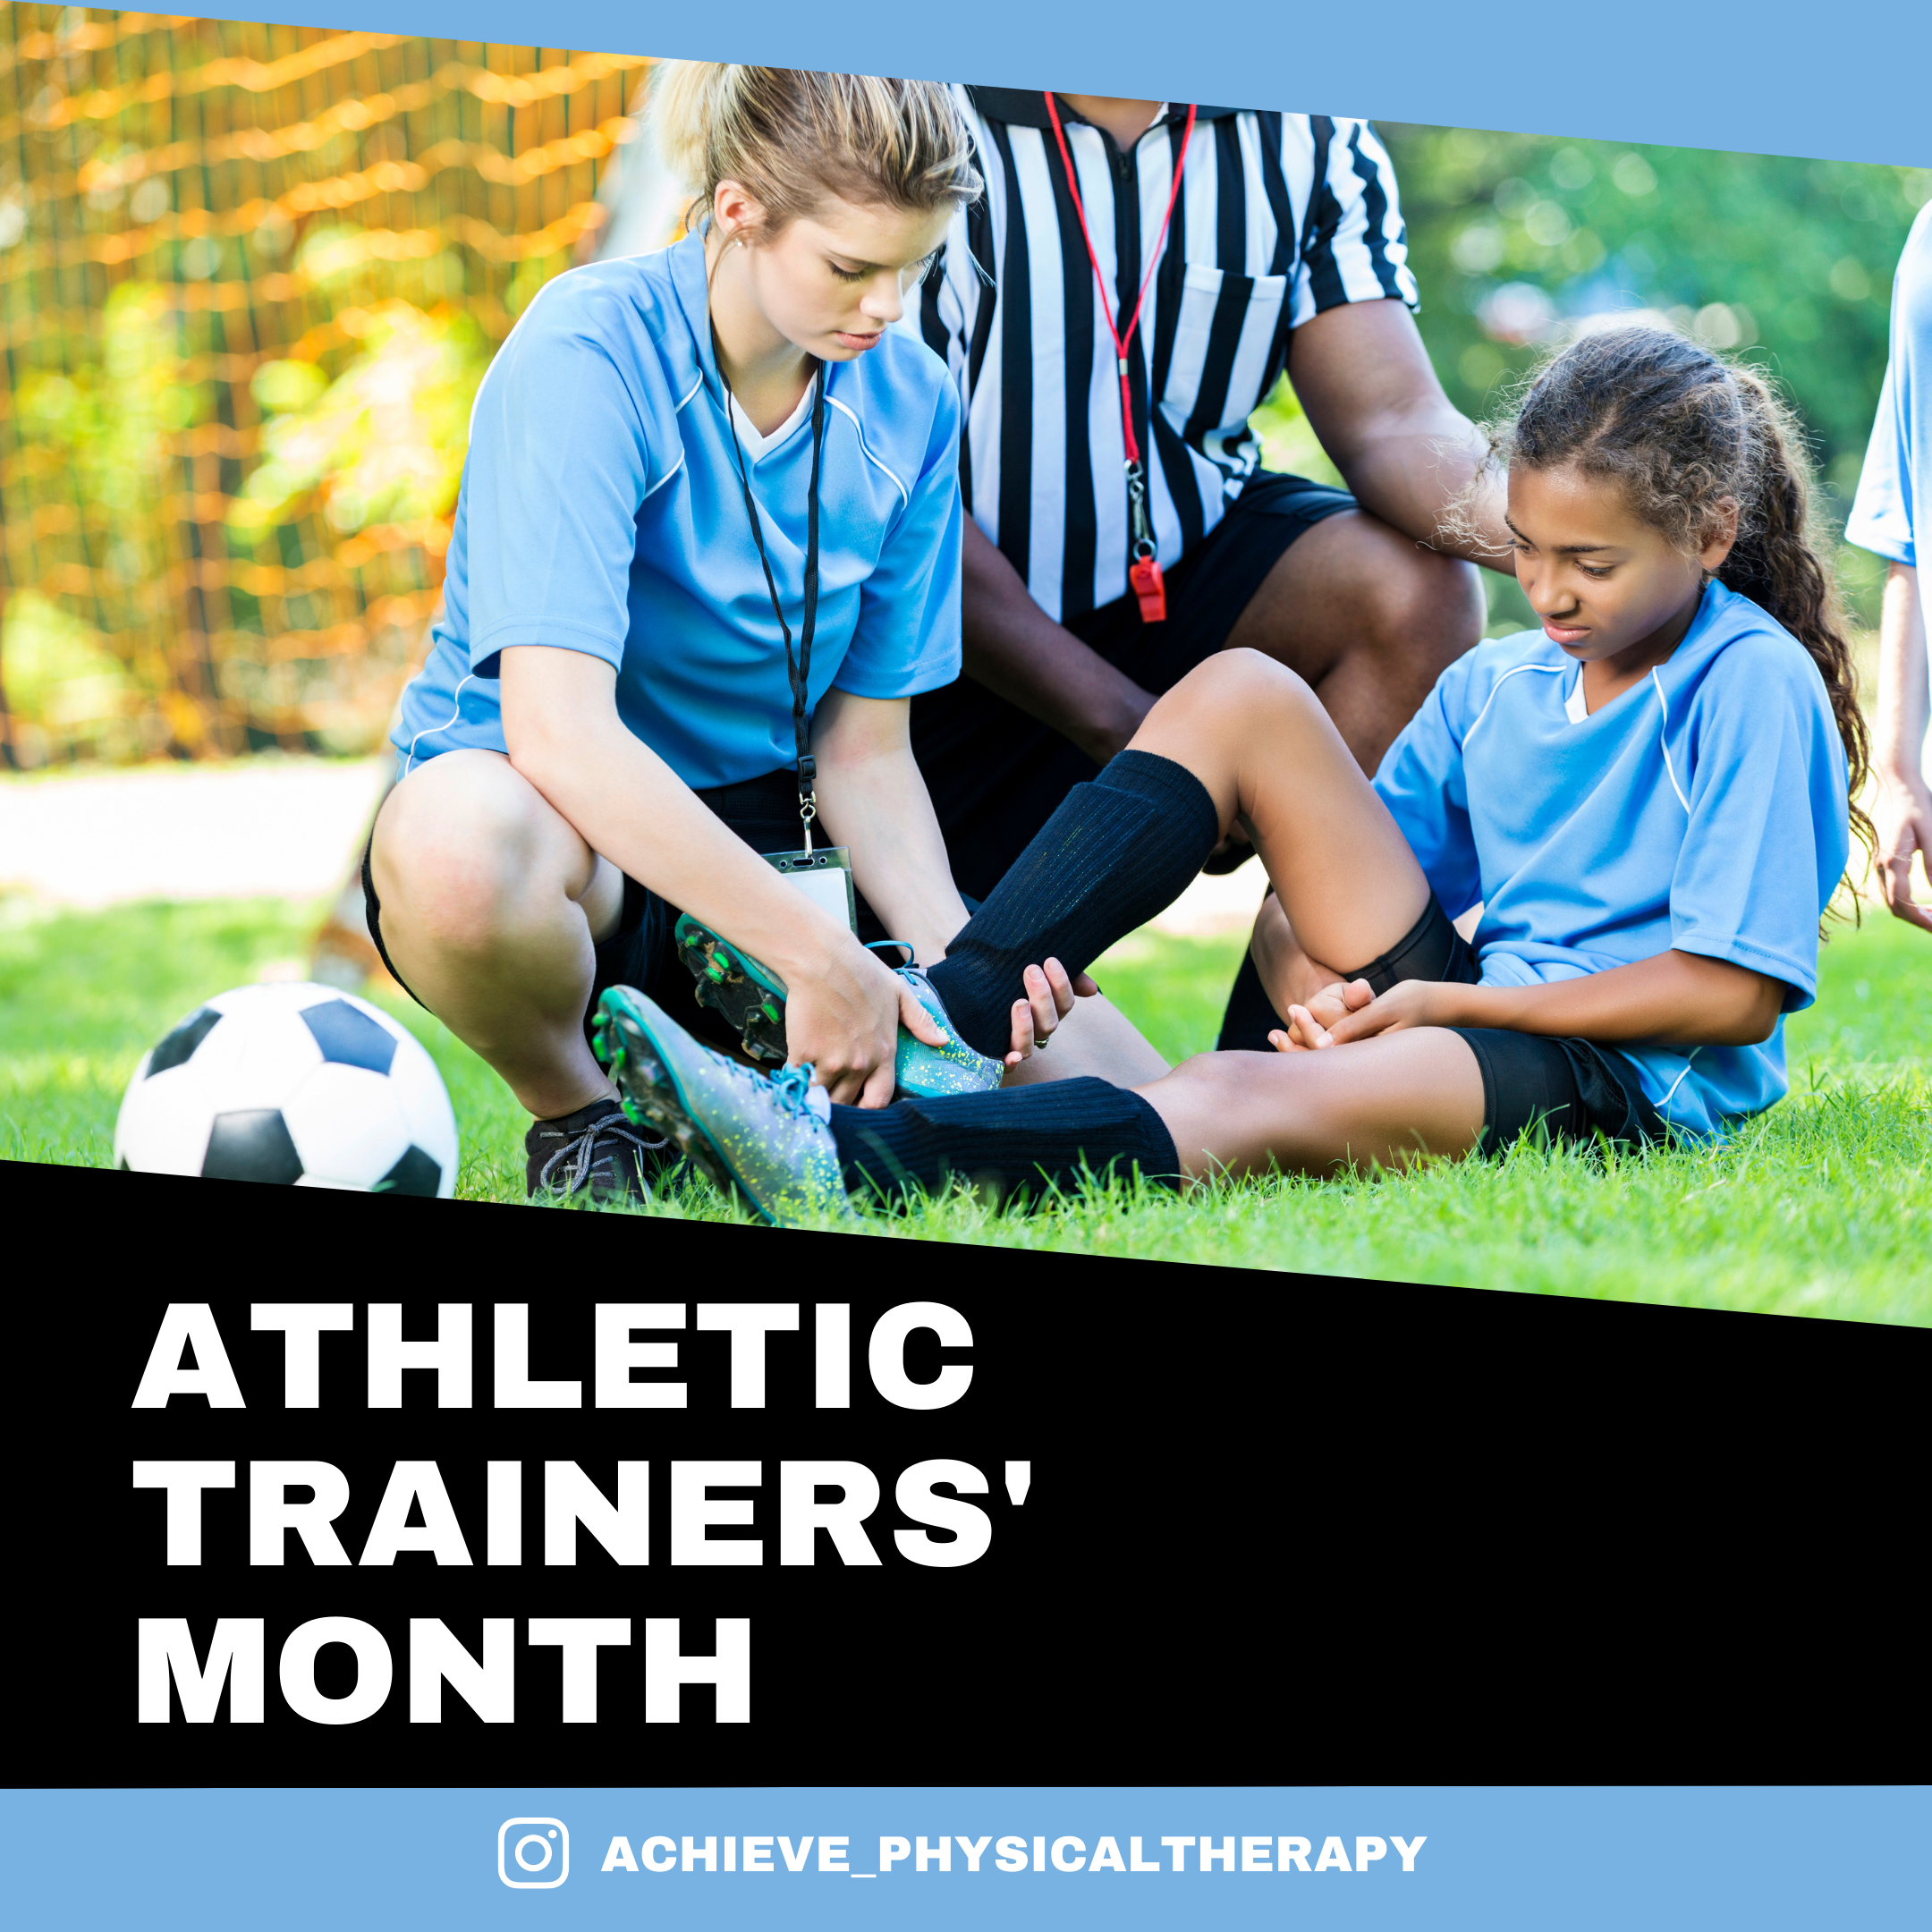 Athletic Training Month, what are athletic trainers